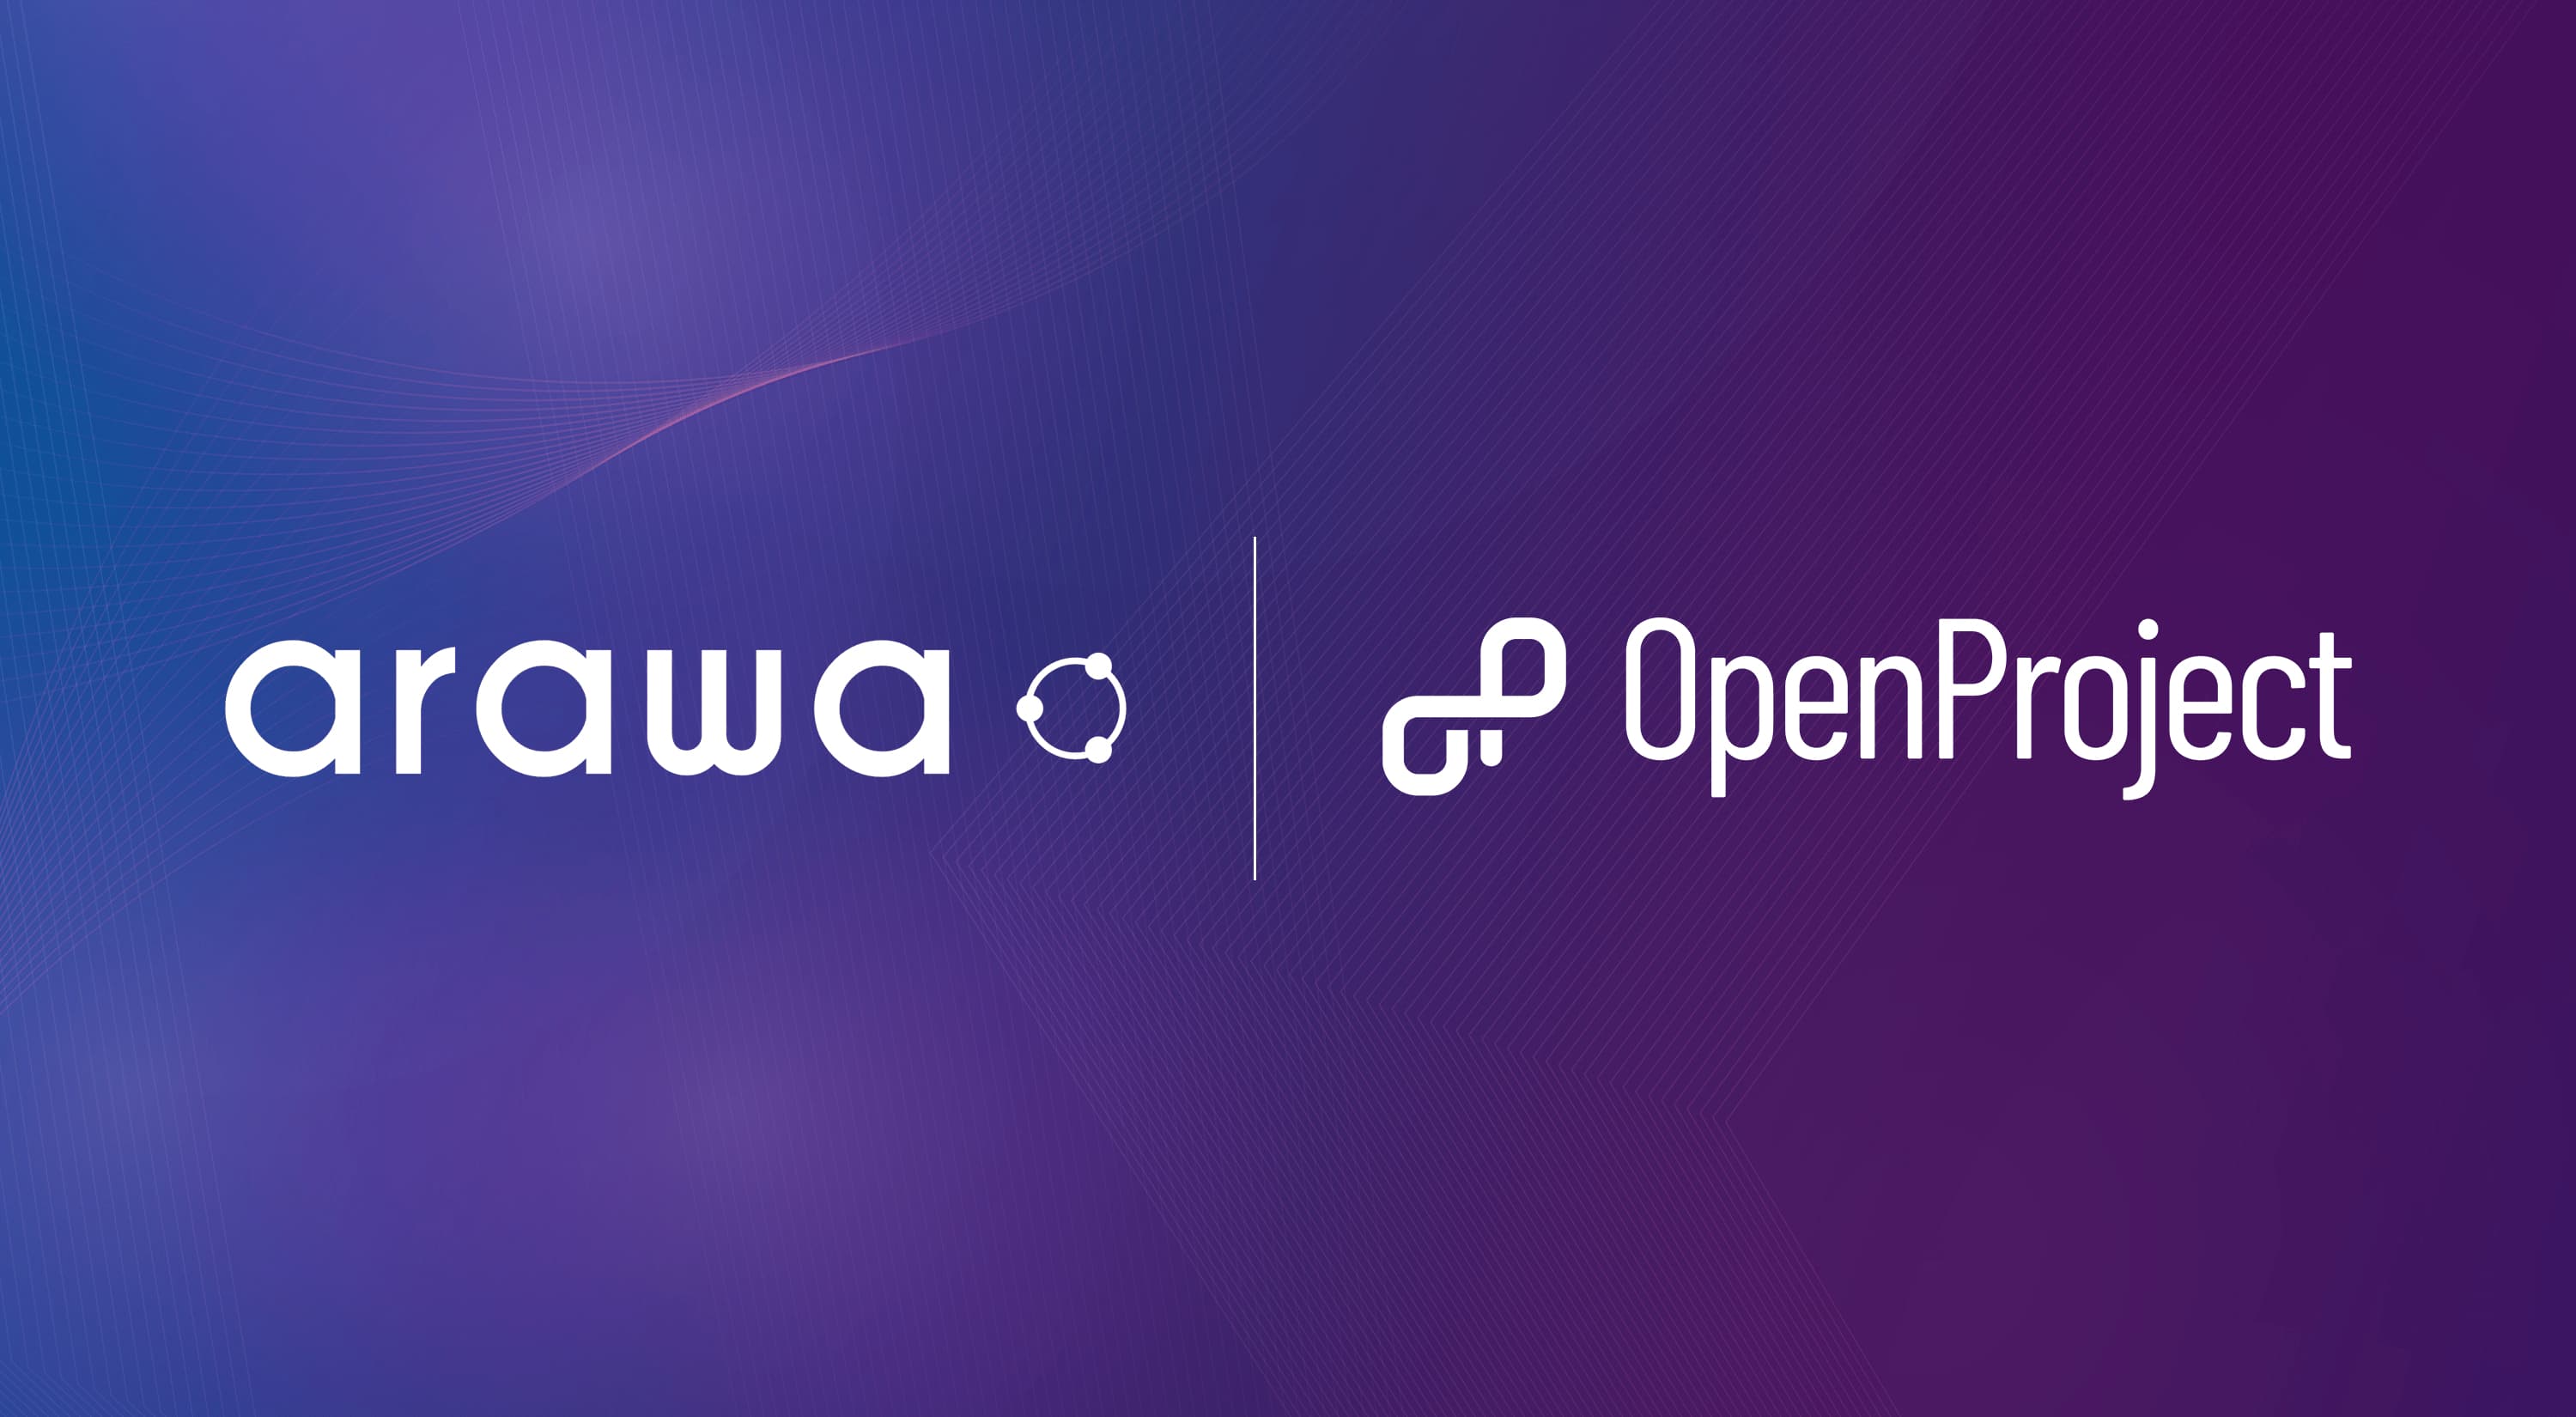 Fostering open source software and project management in France: OpenProject joins forces with Arawa